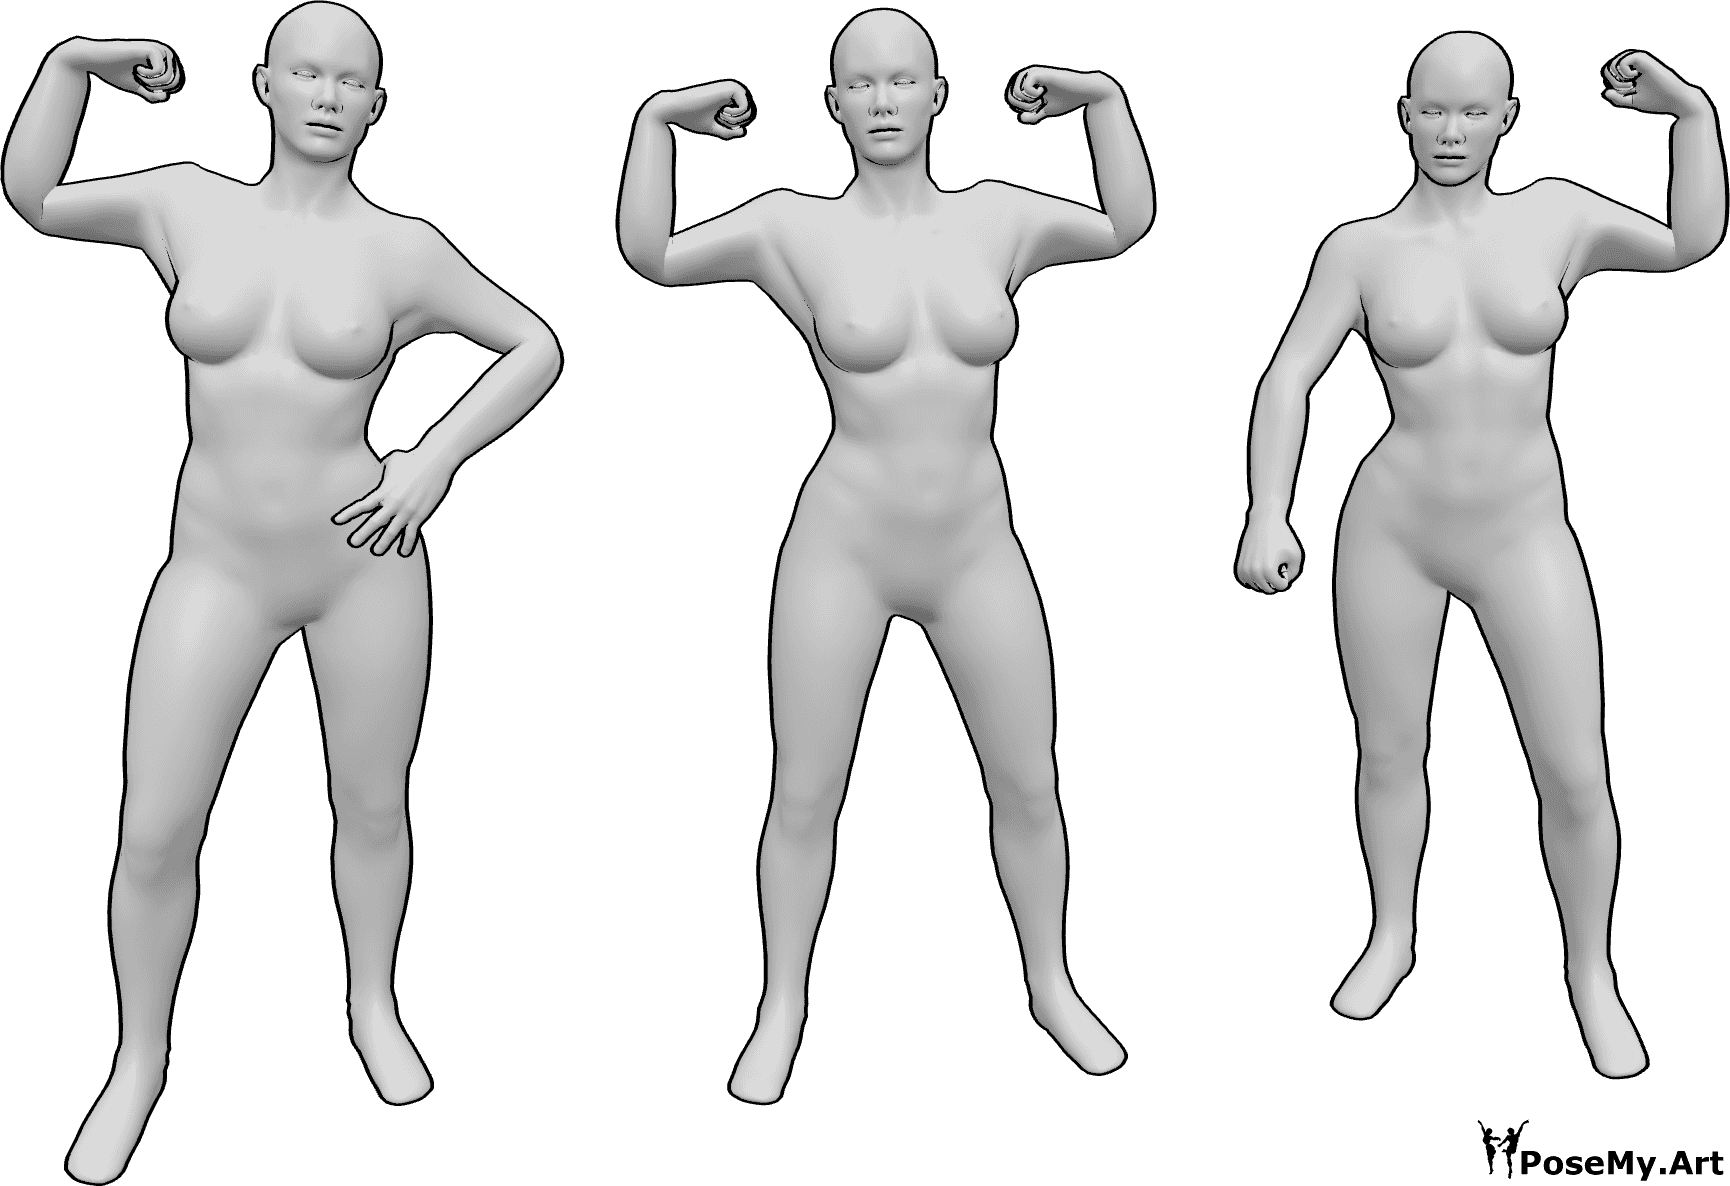 Pose Reference- Muscular females standing pose - Three females are standing and showing their muscles